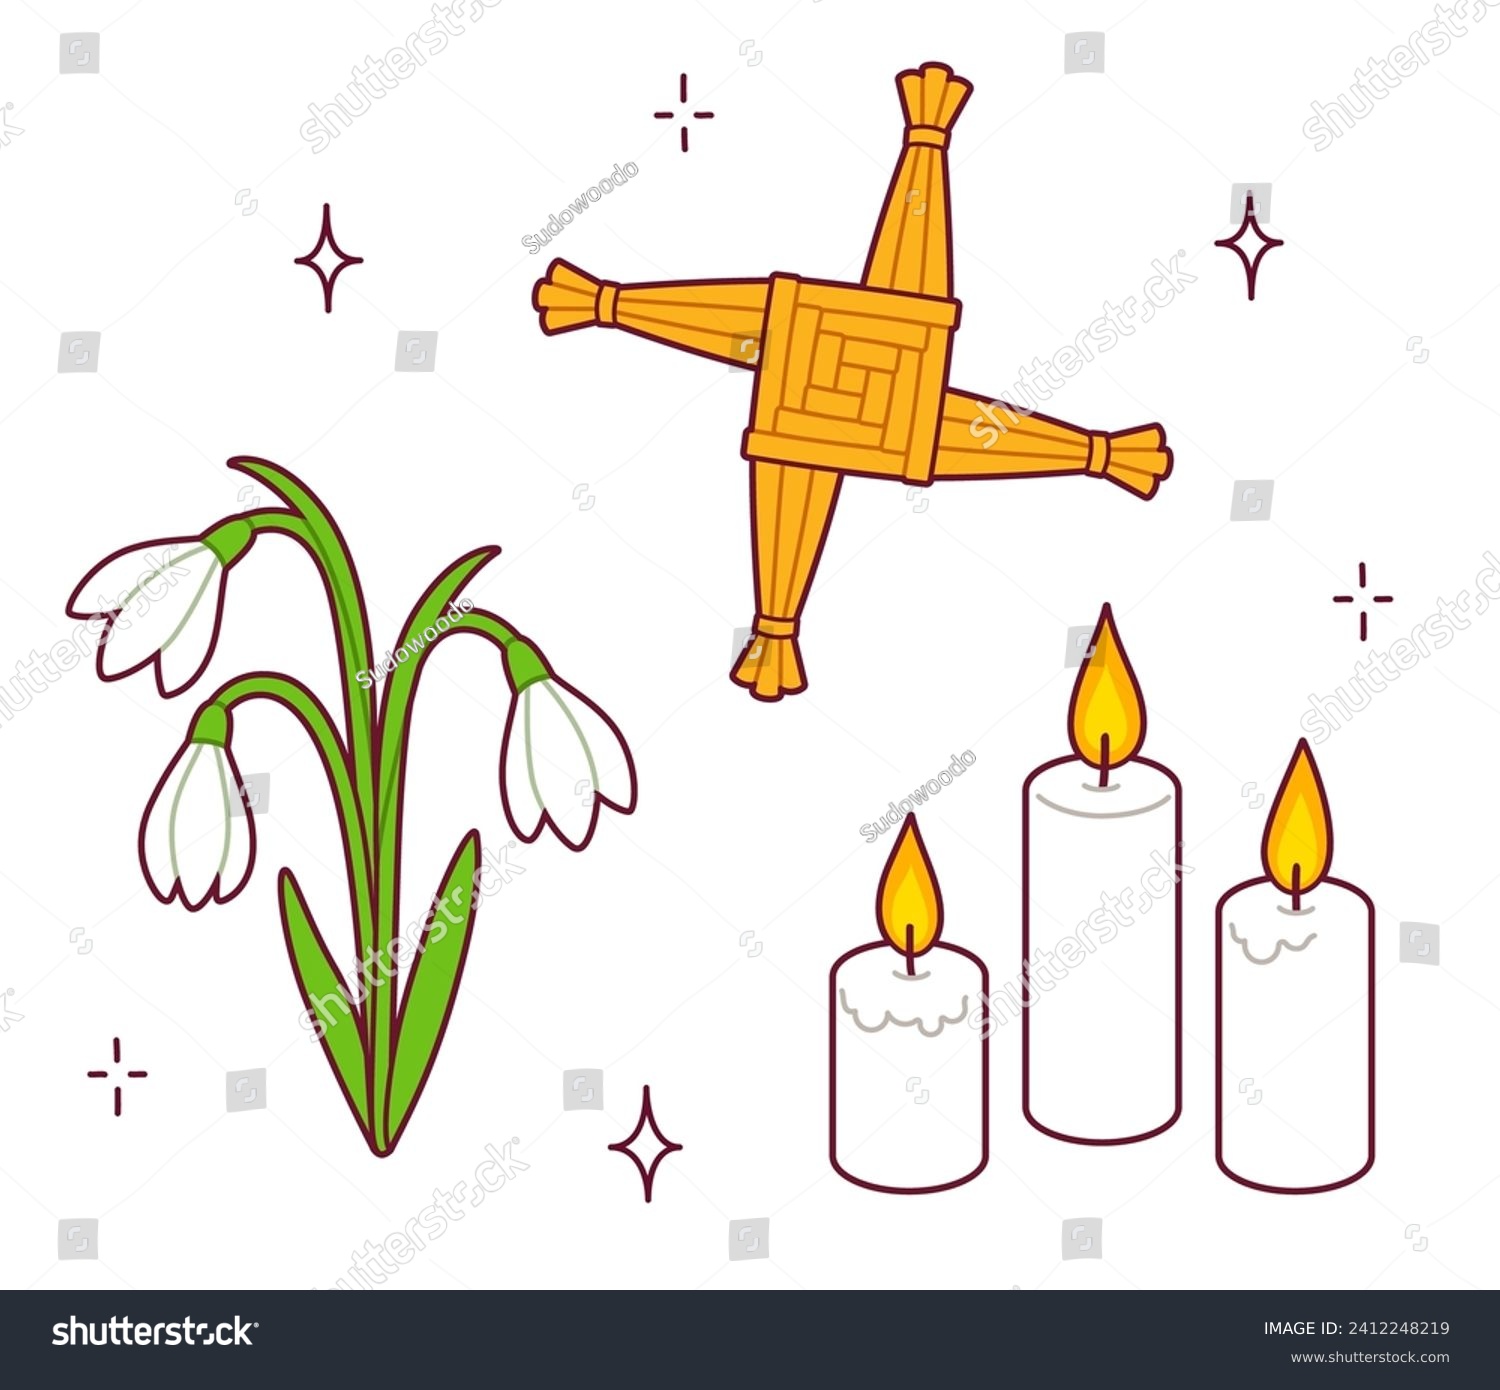 SVG of Imbolc symbols doodle set, pagan spring holiday. Saint Brigid's cross, snowdrop flowers, white candles. Vector illustration, simple drawing.  svg